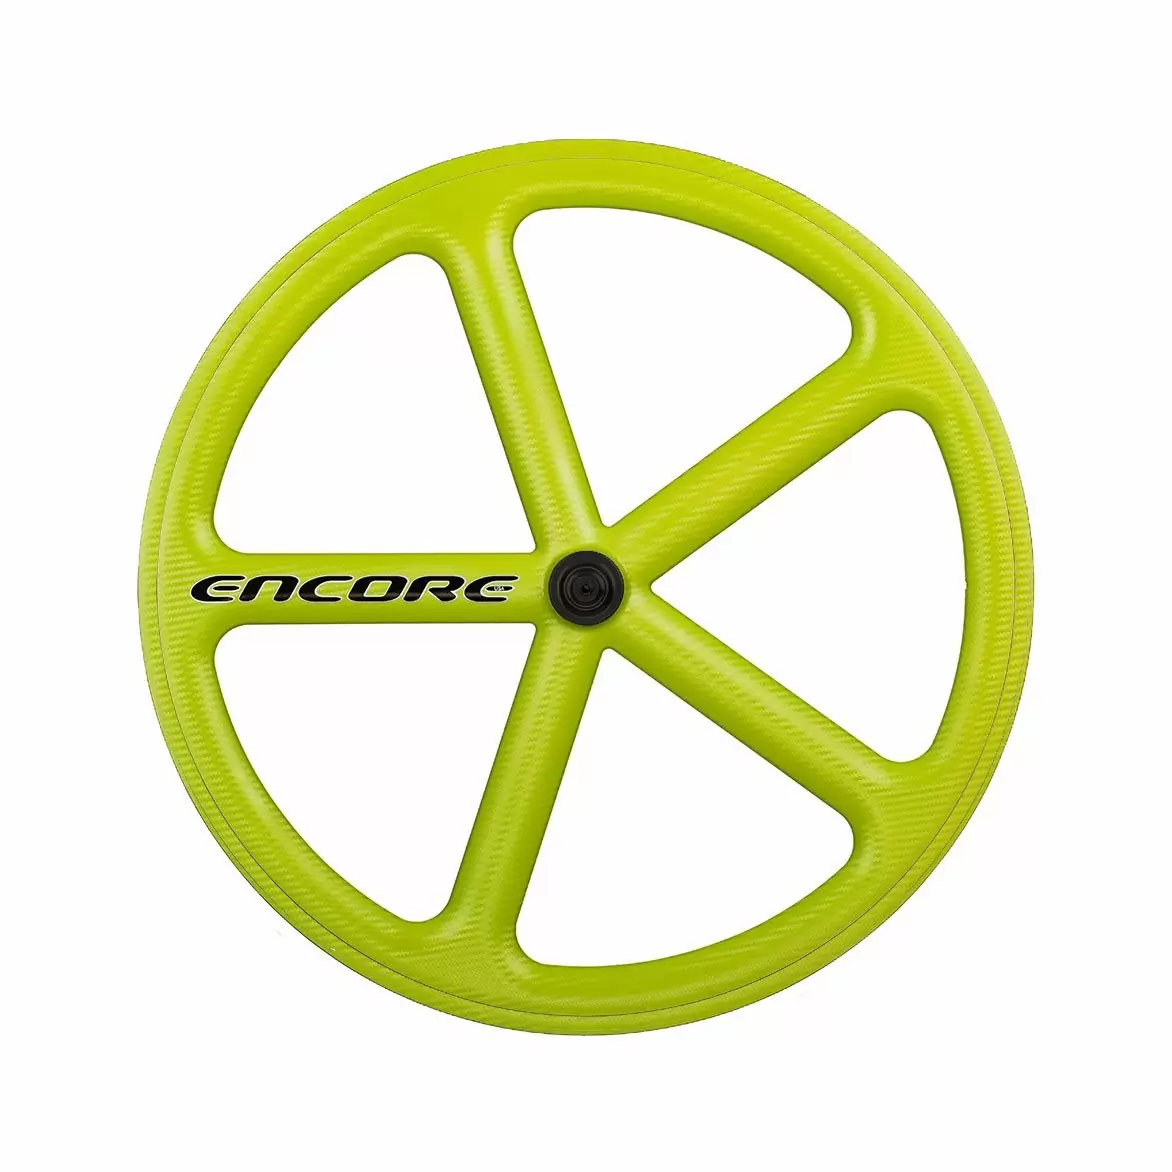 rear wheel 700c track 5 spokes carbon weave lime nmsw - image